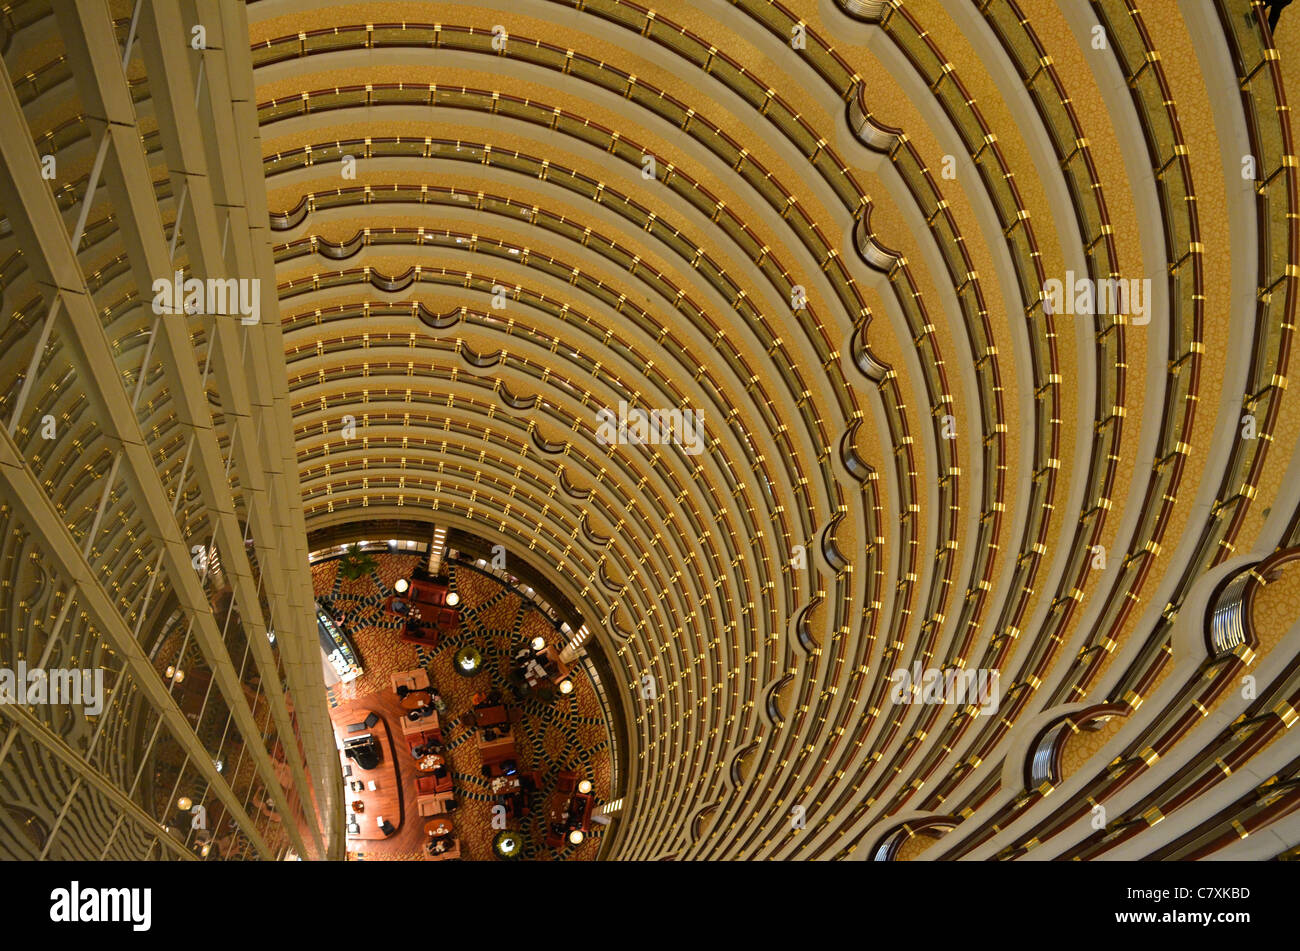 The lobby bar of the Grand Hyatt hotel sits at the bottom of this impressive atrium, located in the Jin Mao Tower. Stock Photo